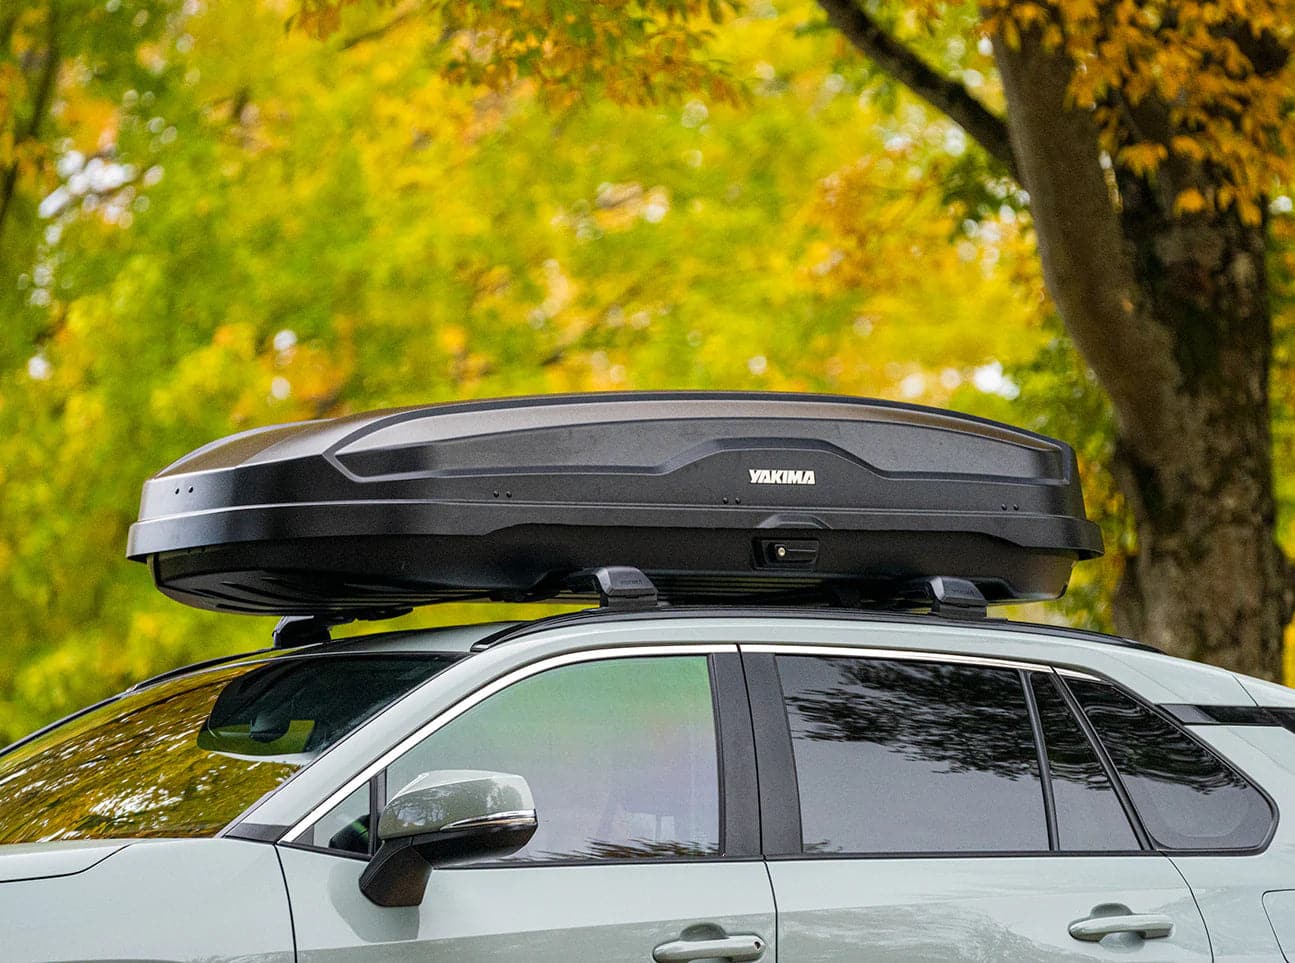 Featuring the Skybox NX 18 cargo box, transport manufactured by Yakima shown here from a second angle.